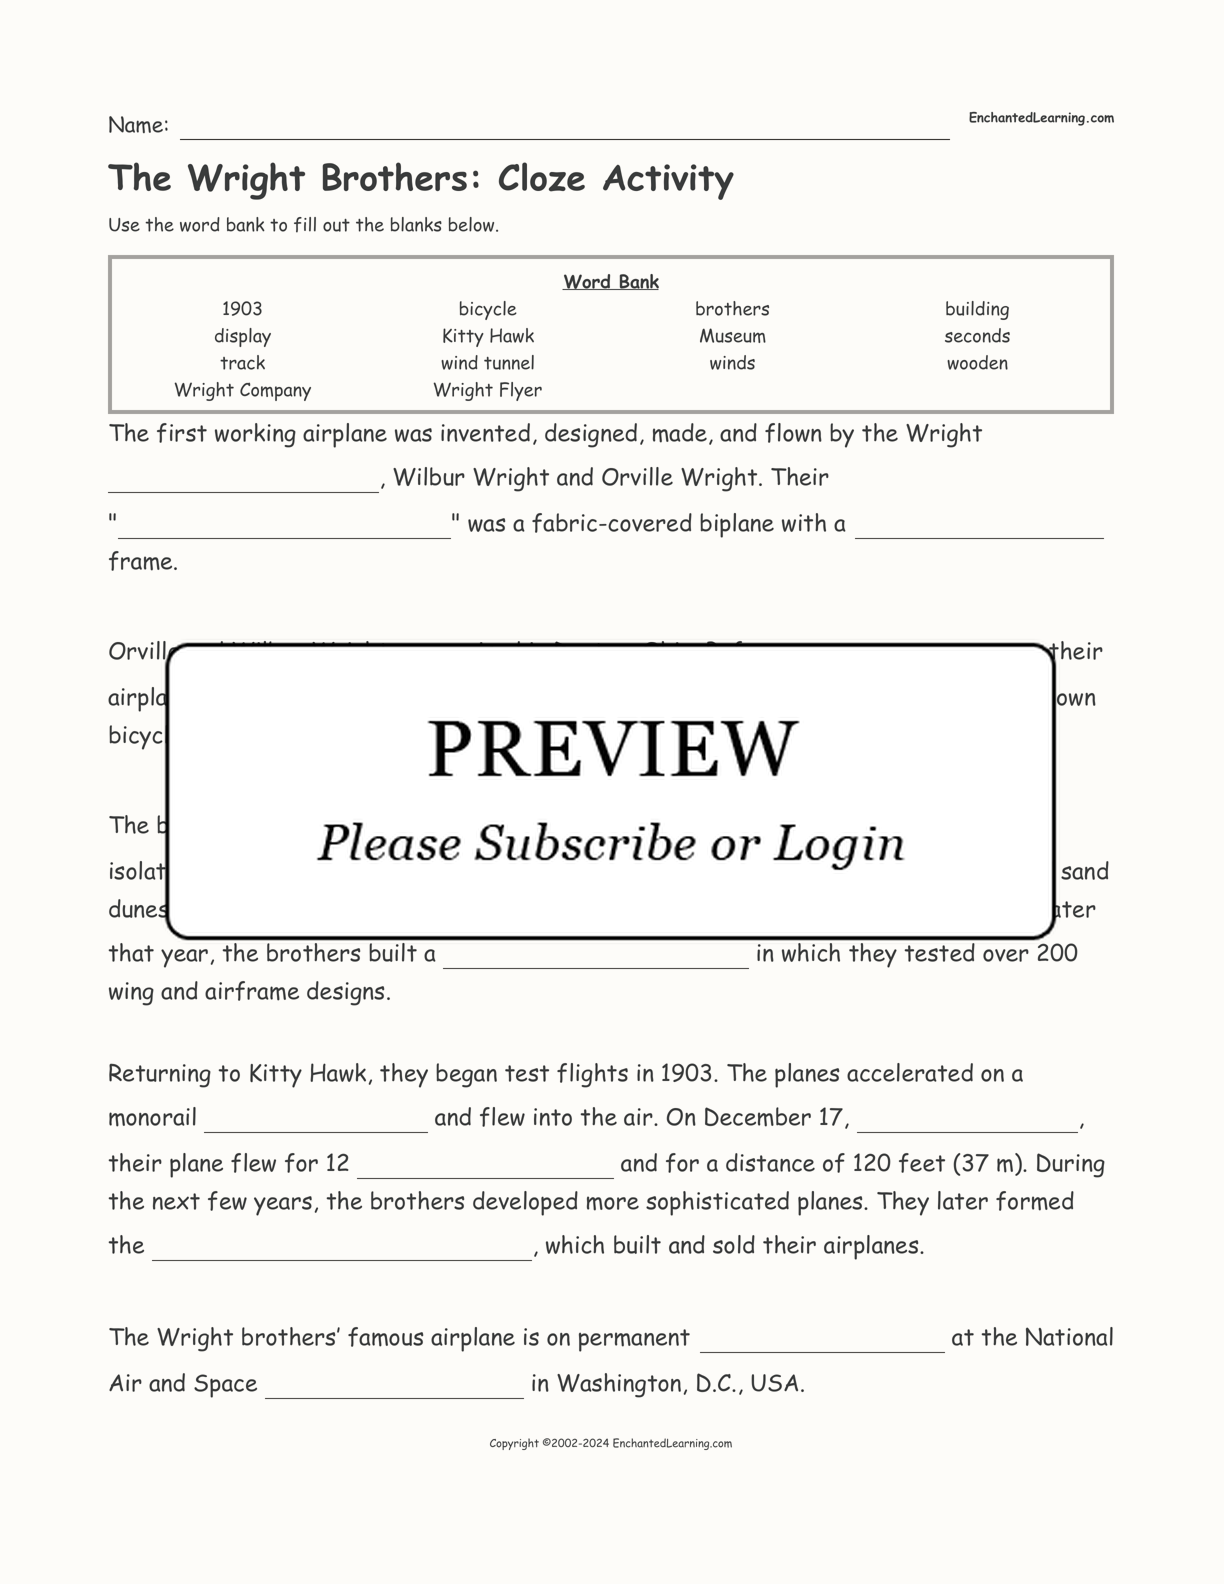 The Wright Brothers: Cloze Activity interactive worksheet page 1